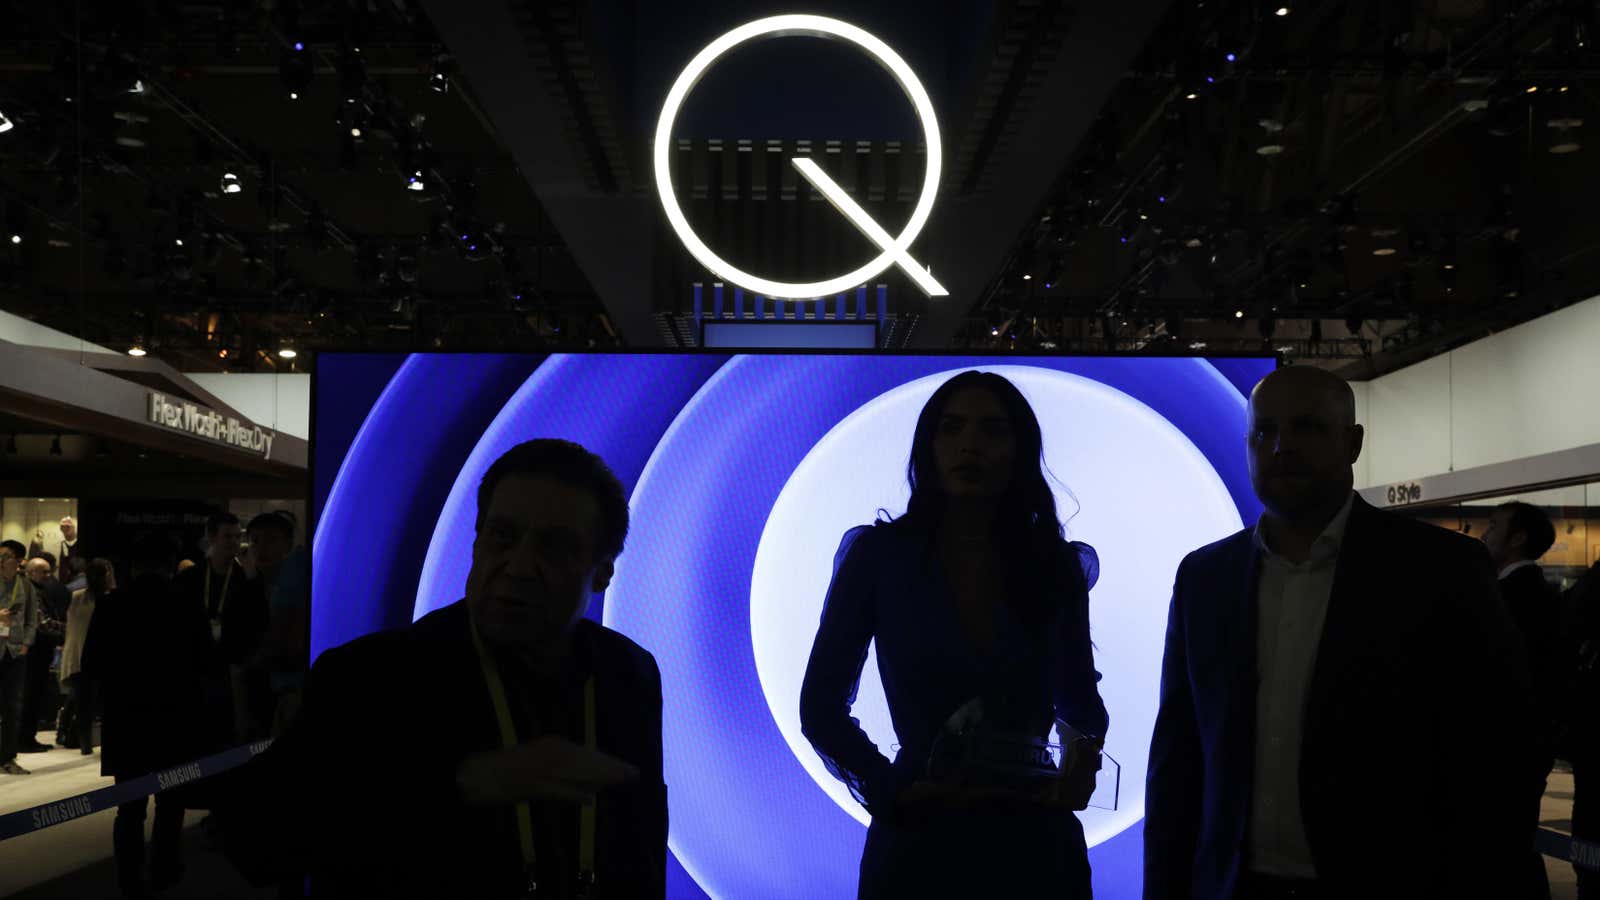 Your Quartz guide to the winners of CES.